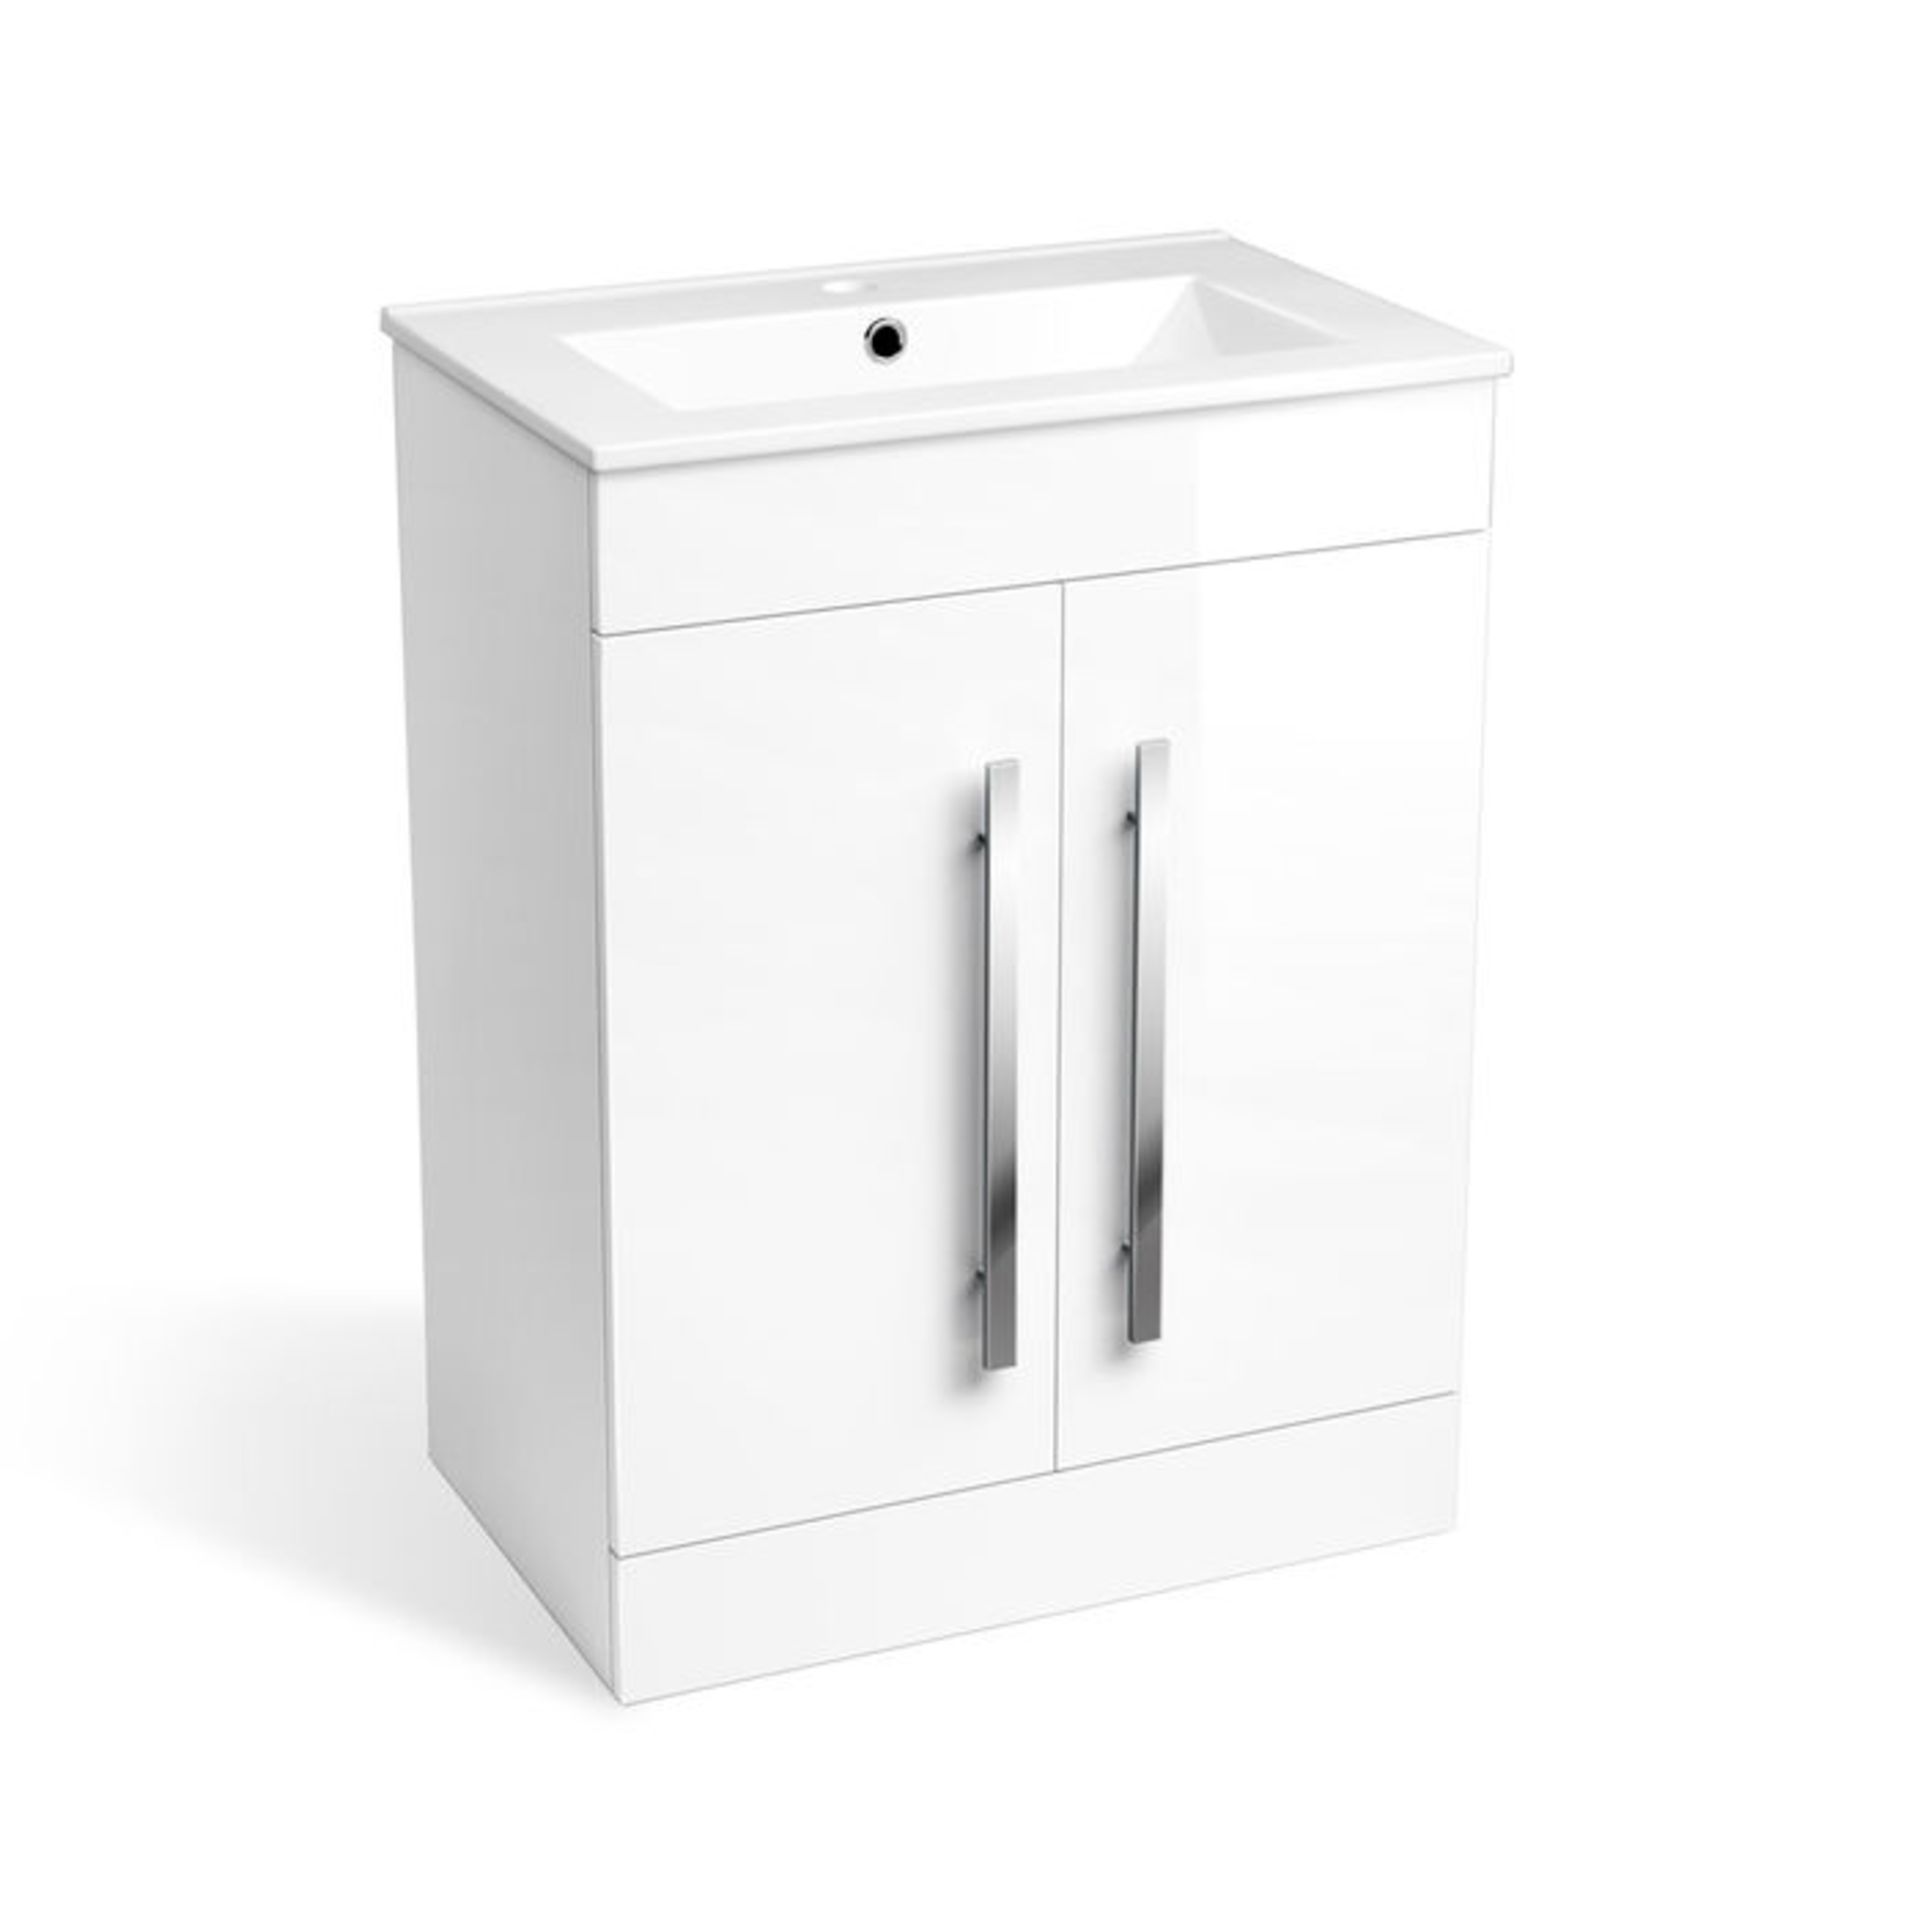 (AH27) 600mm Avon High Gloss White Basin Cabinet - Floor Standing. RRP £499.99. Comes complete - Image 4 of 4